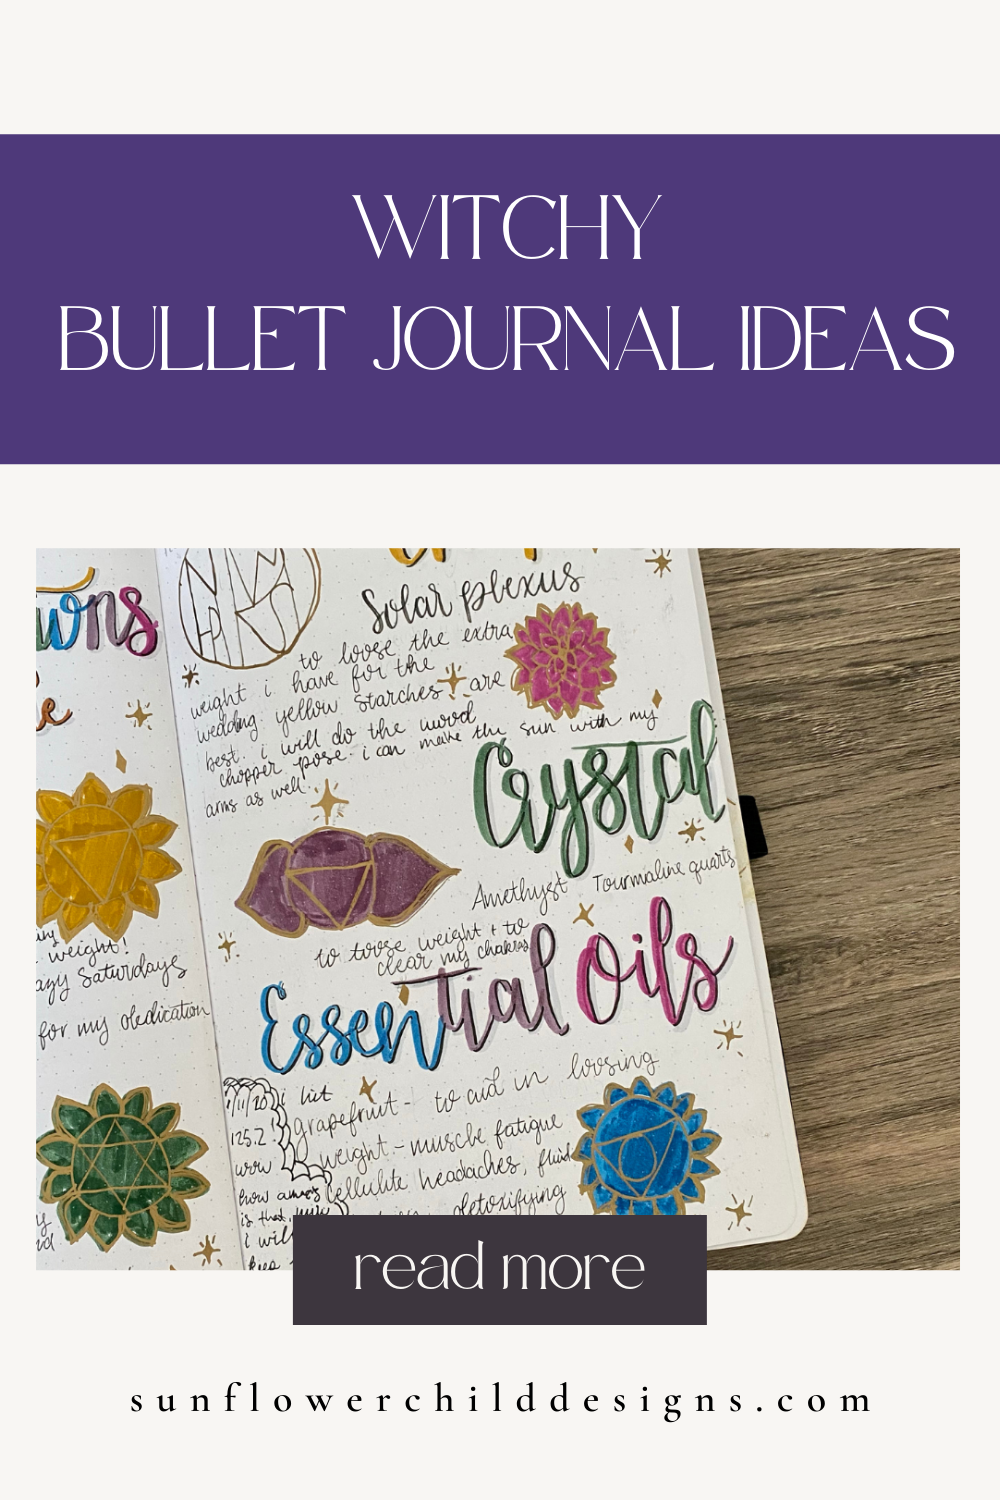 witchy-bullet-journal-january-bullet-journal-ideas 4.png